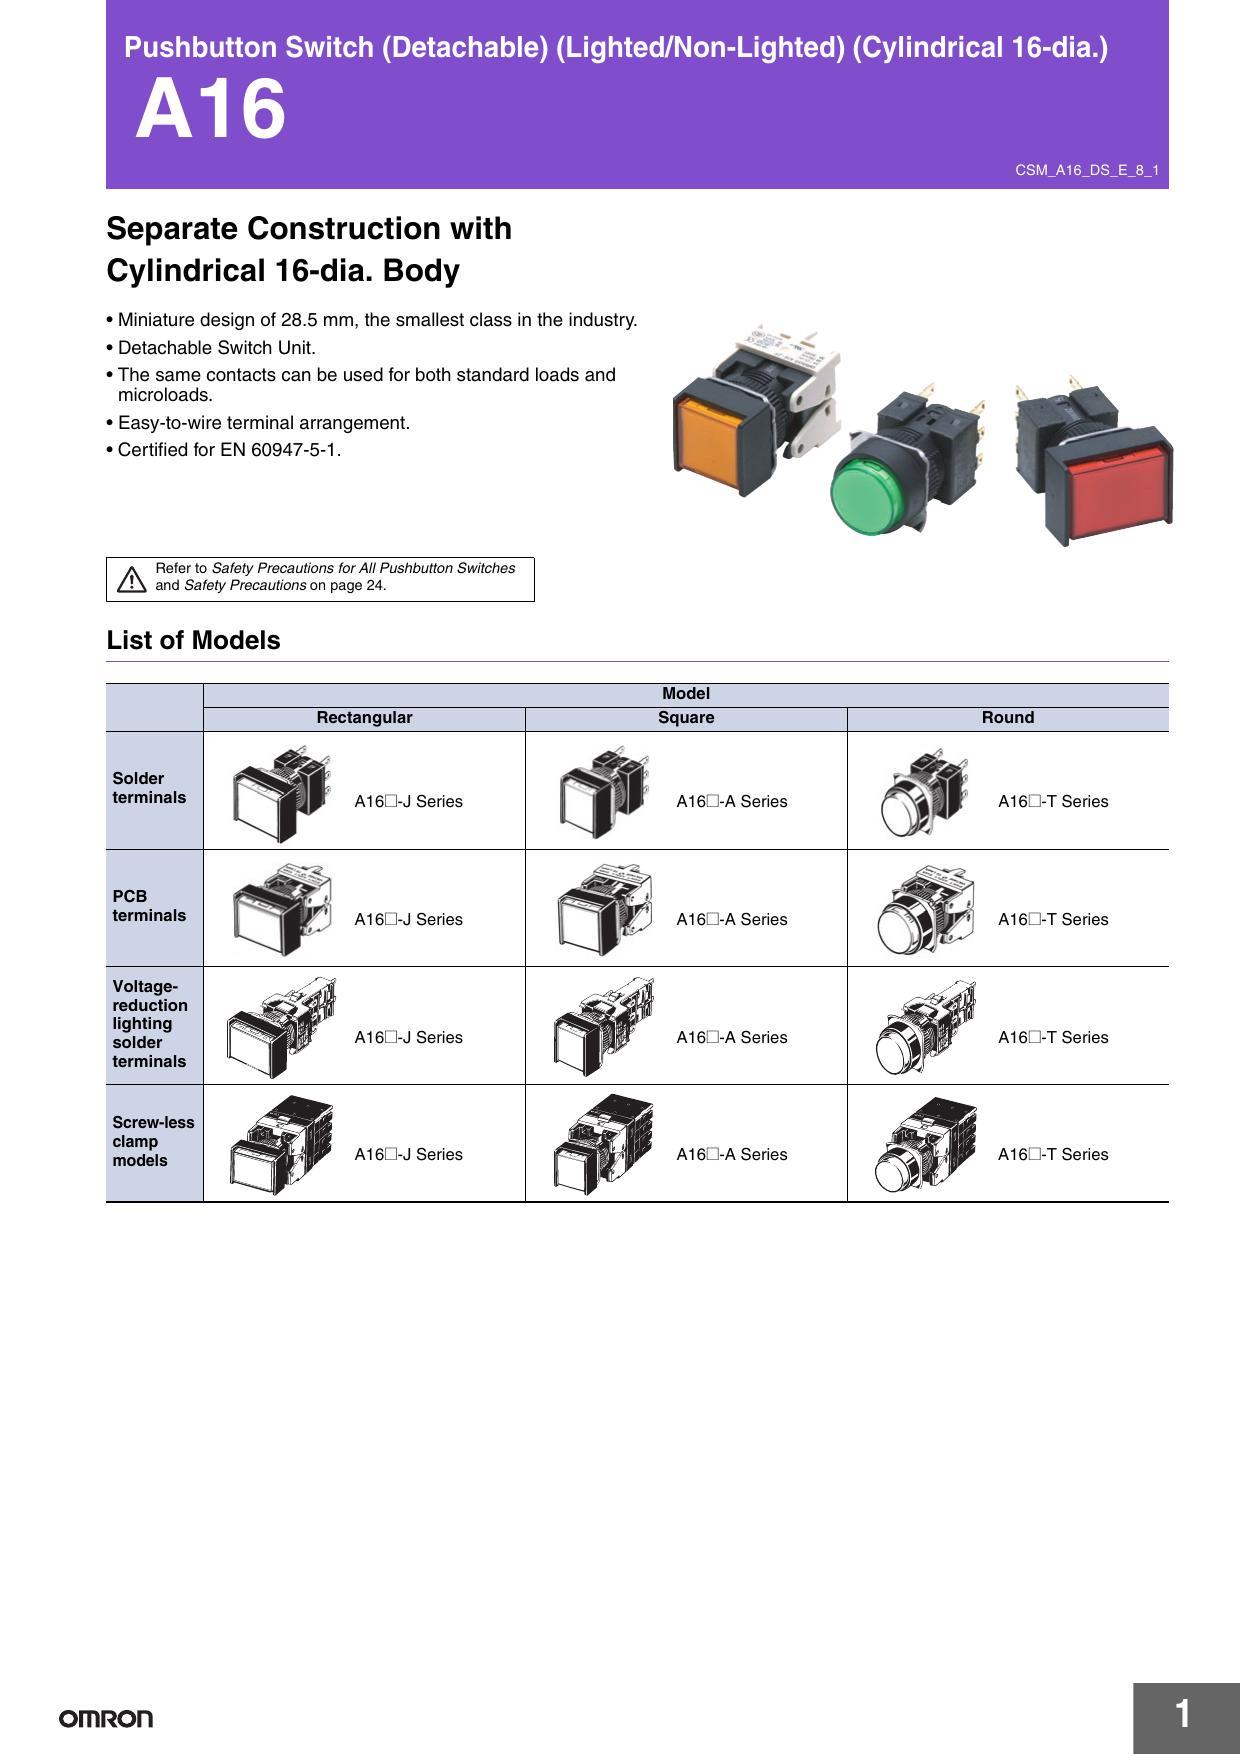 pushbutton-switch-detachable-lightednon-lighted-cylindrical-16-dia.pdf